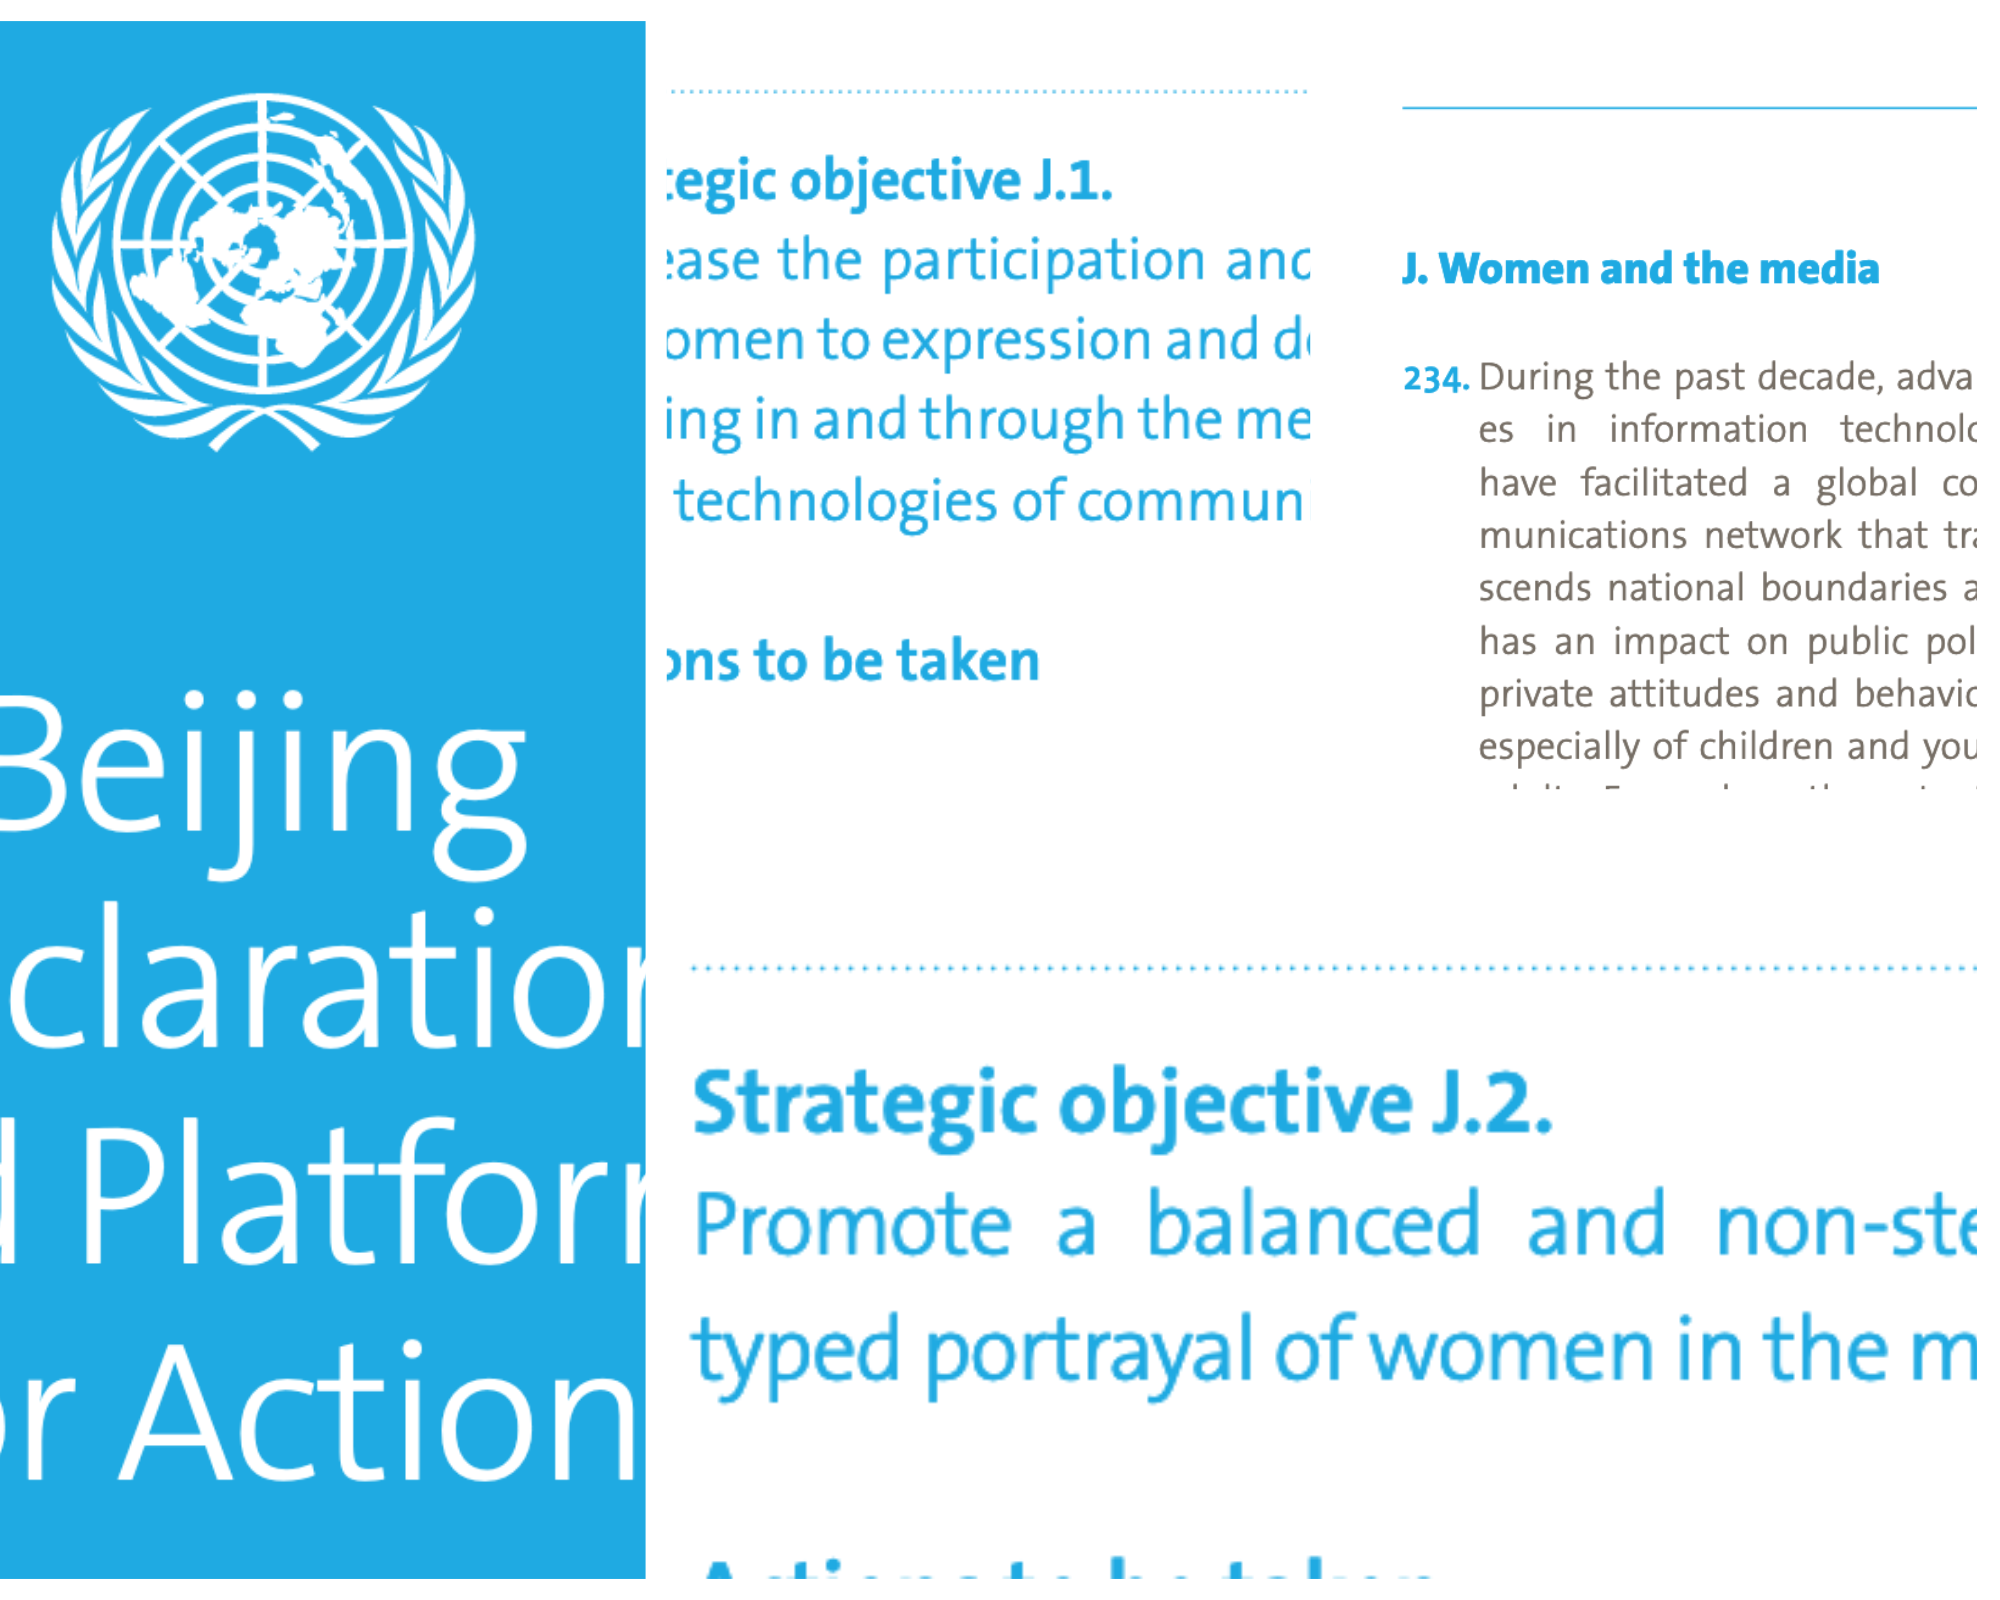 Cropped images of the cover of the Beijing Platform for Action, section J. Women and Media, and Strategic Objectives J1 and J2.